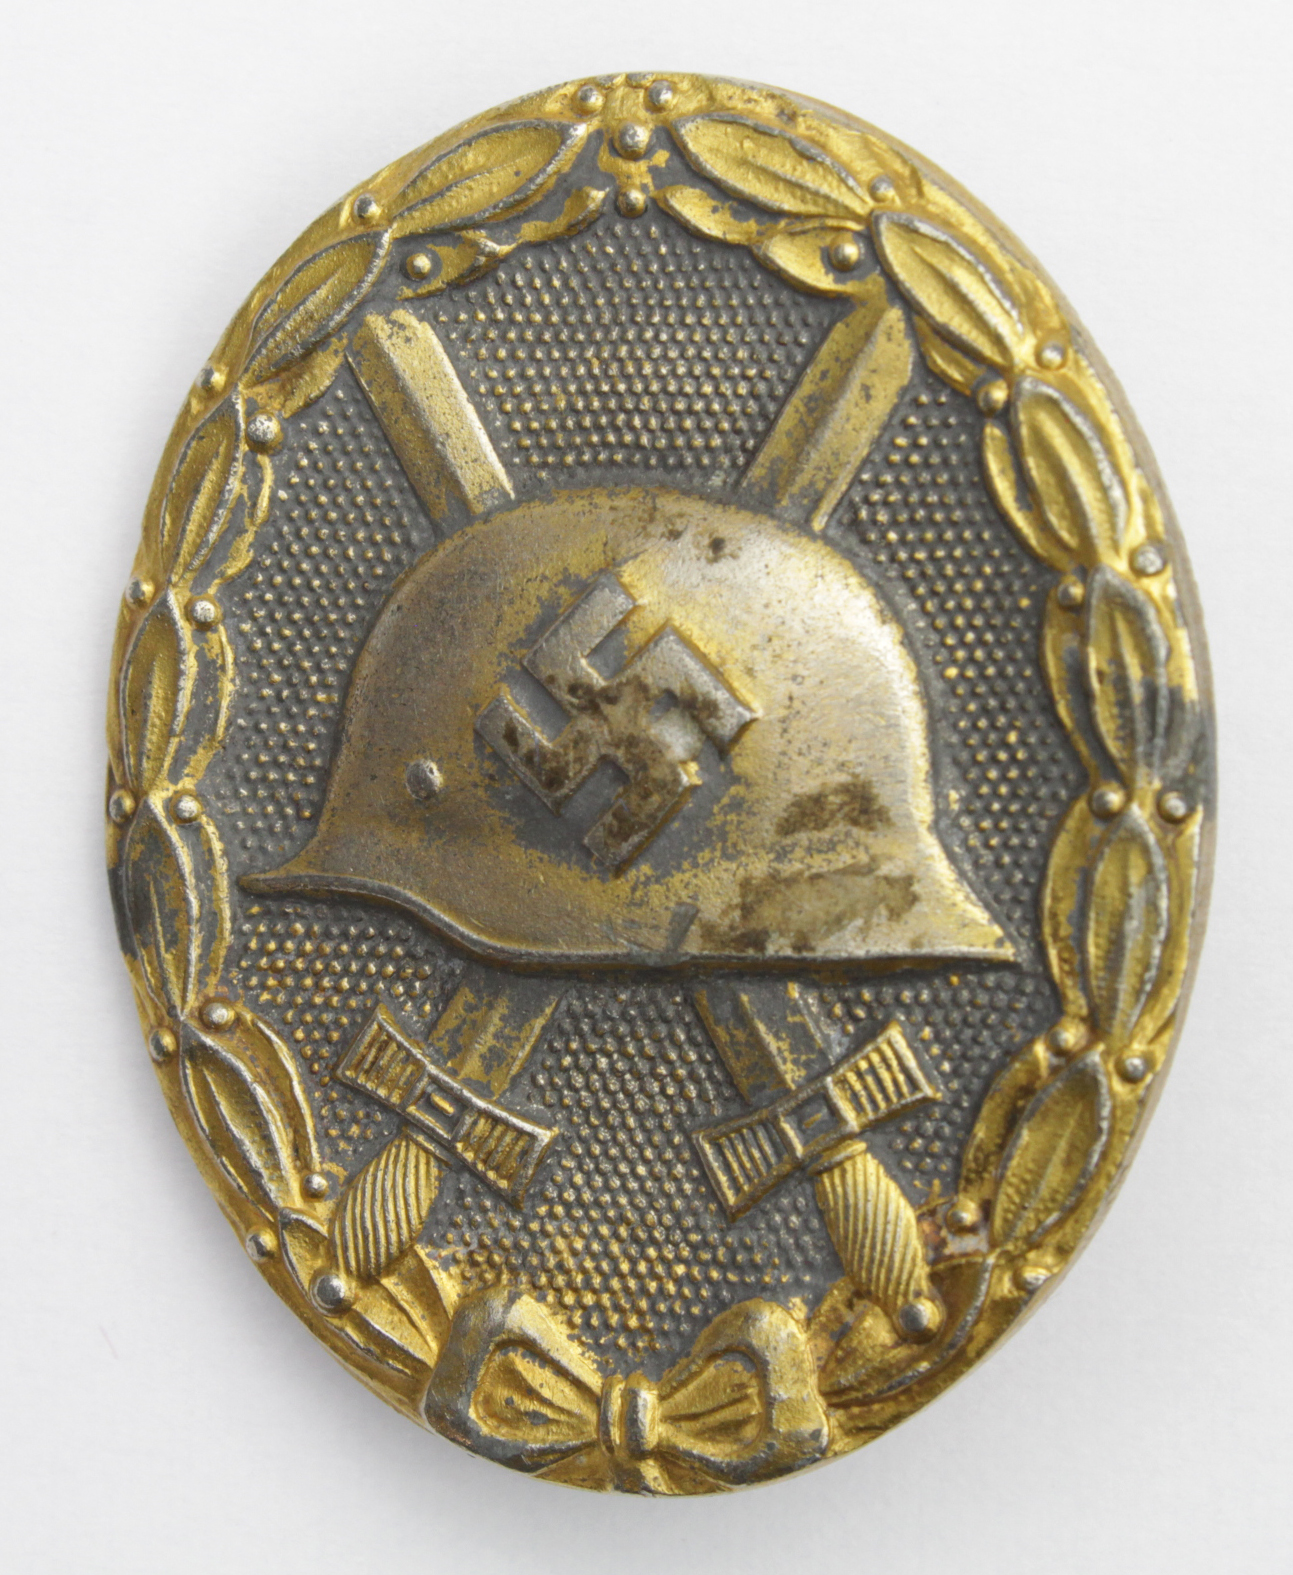 German Gold Wounds badge, solid